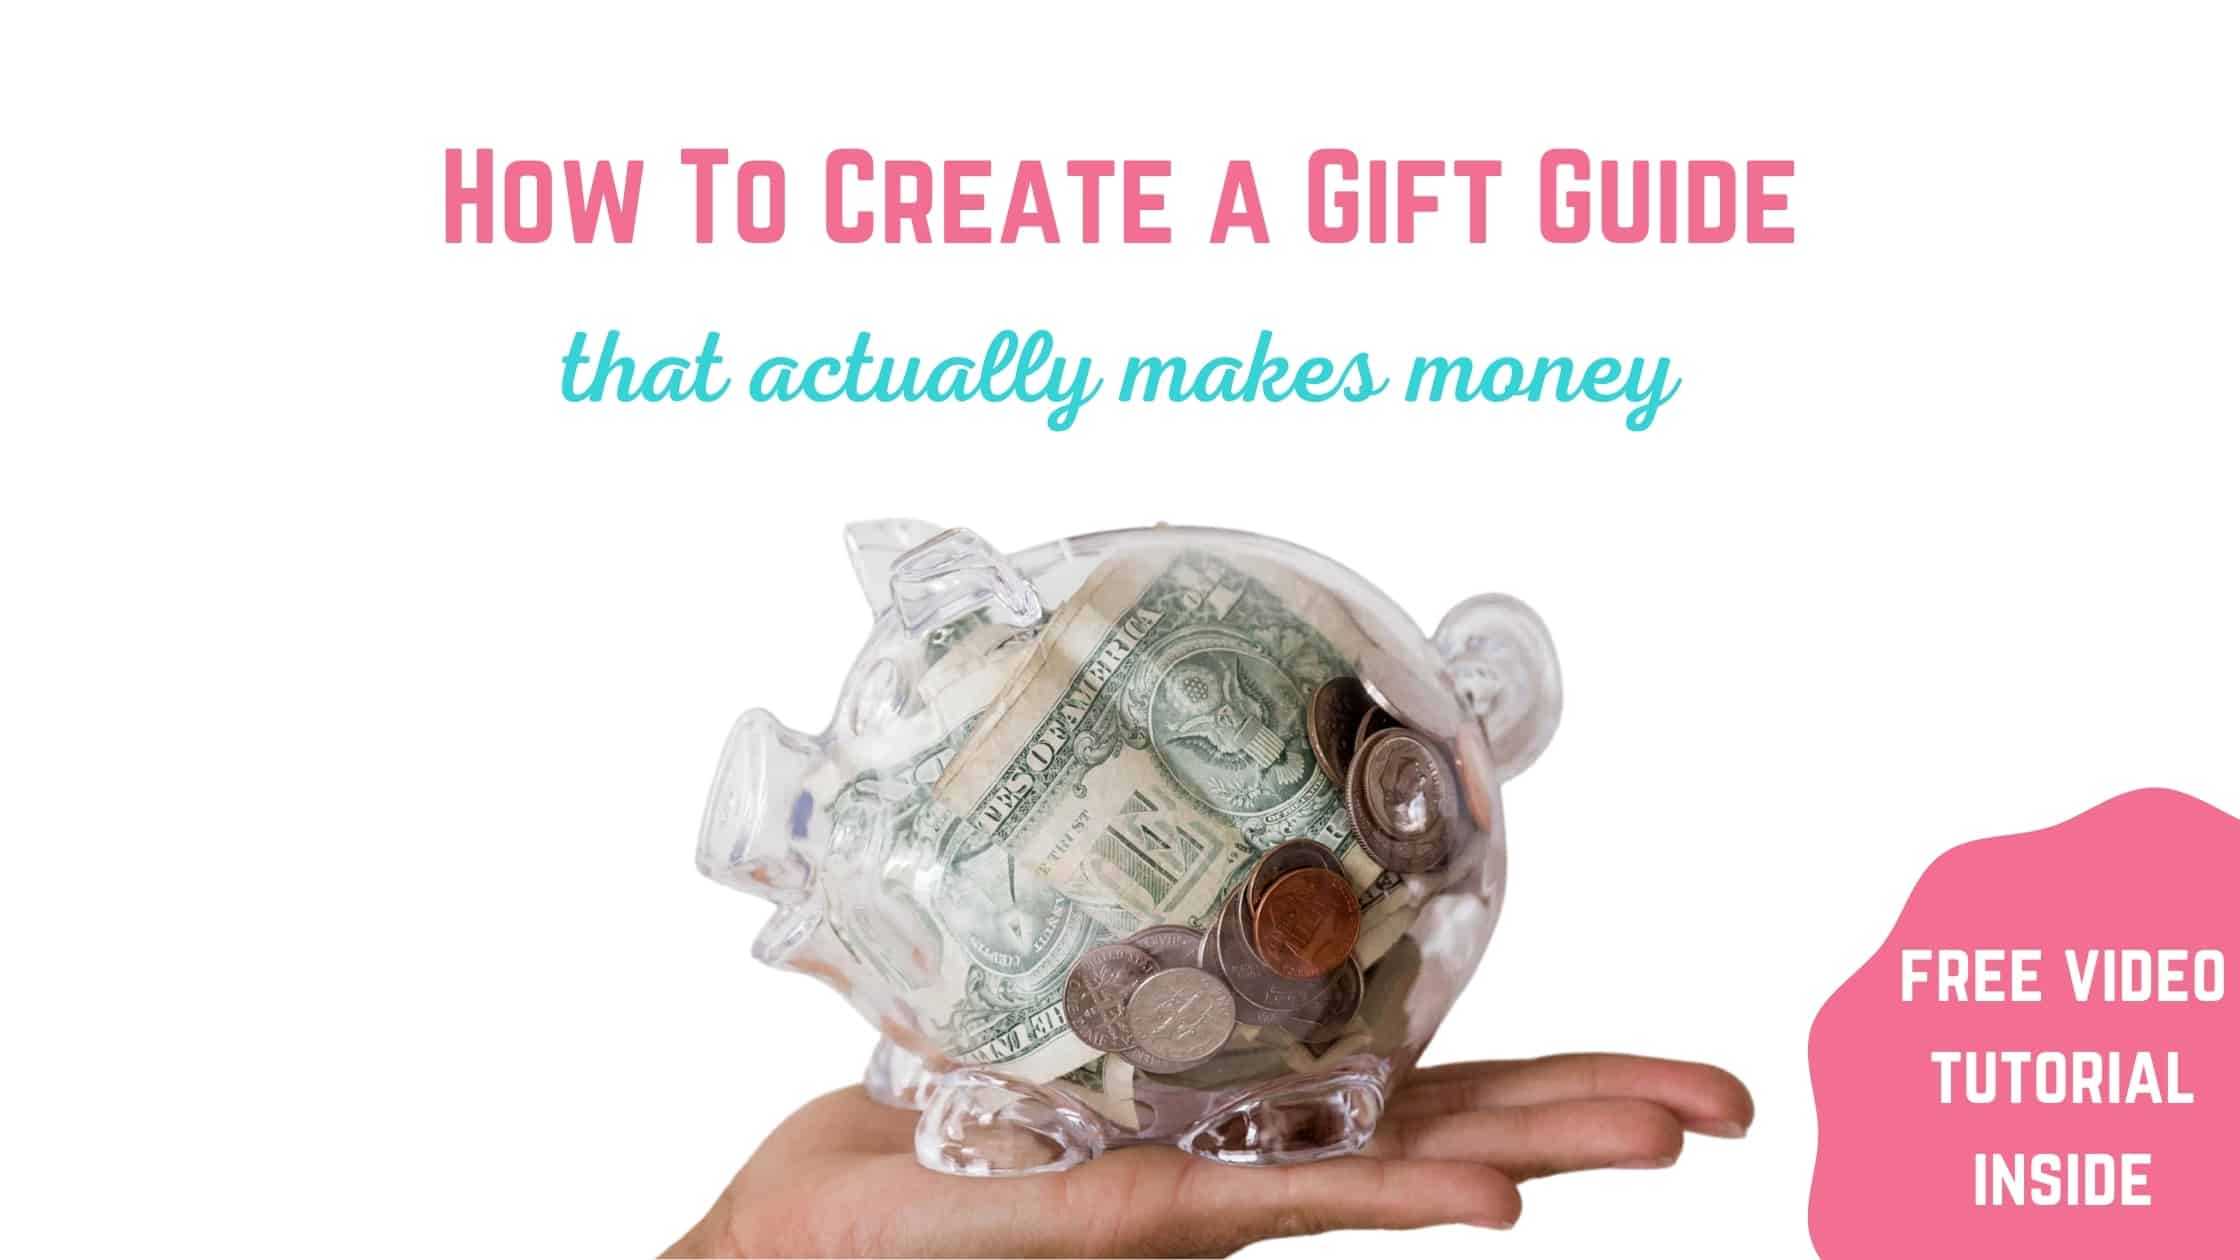 How To Create a Gift Guide for Your Blog (That Actually Makes Money)